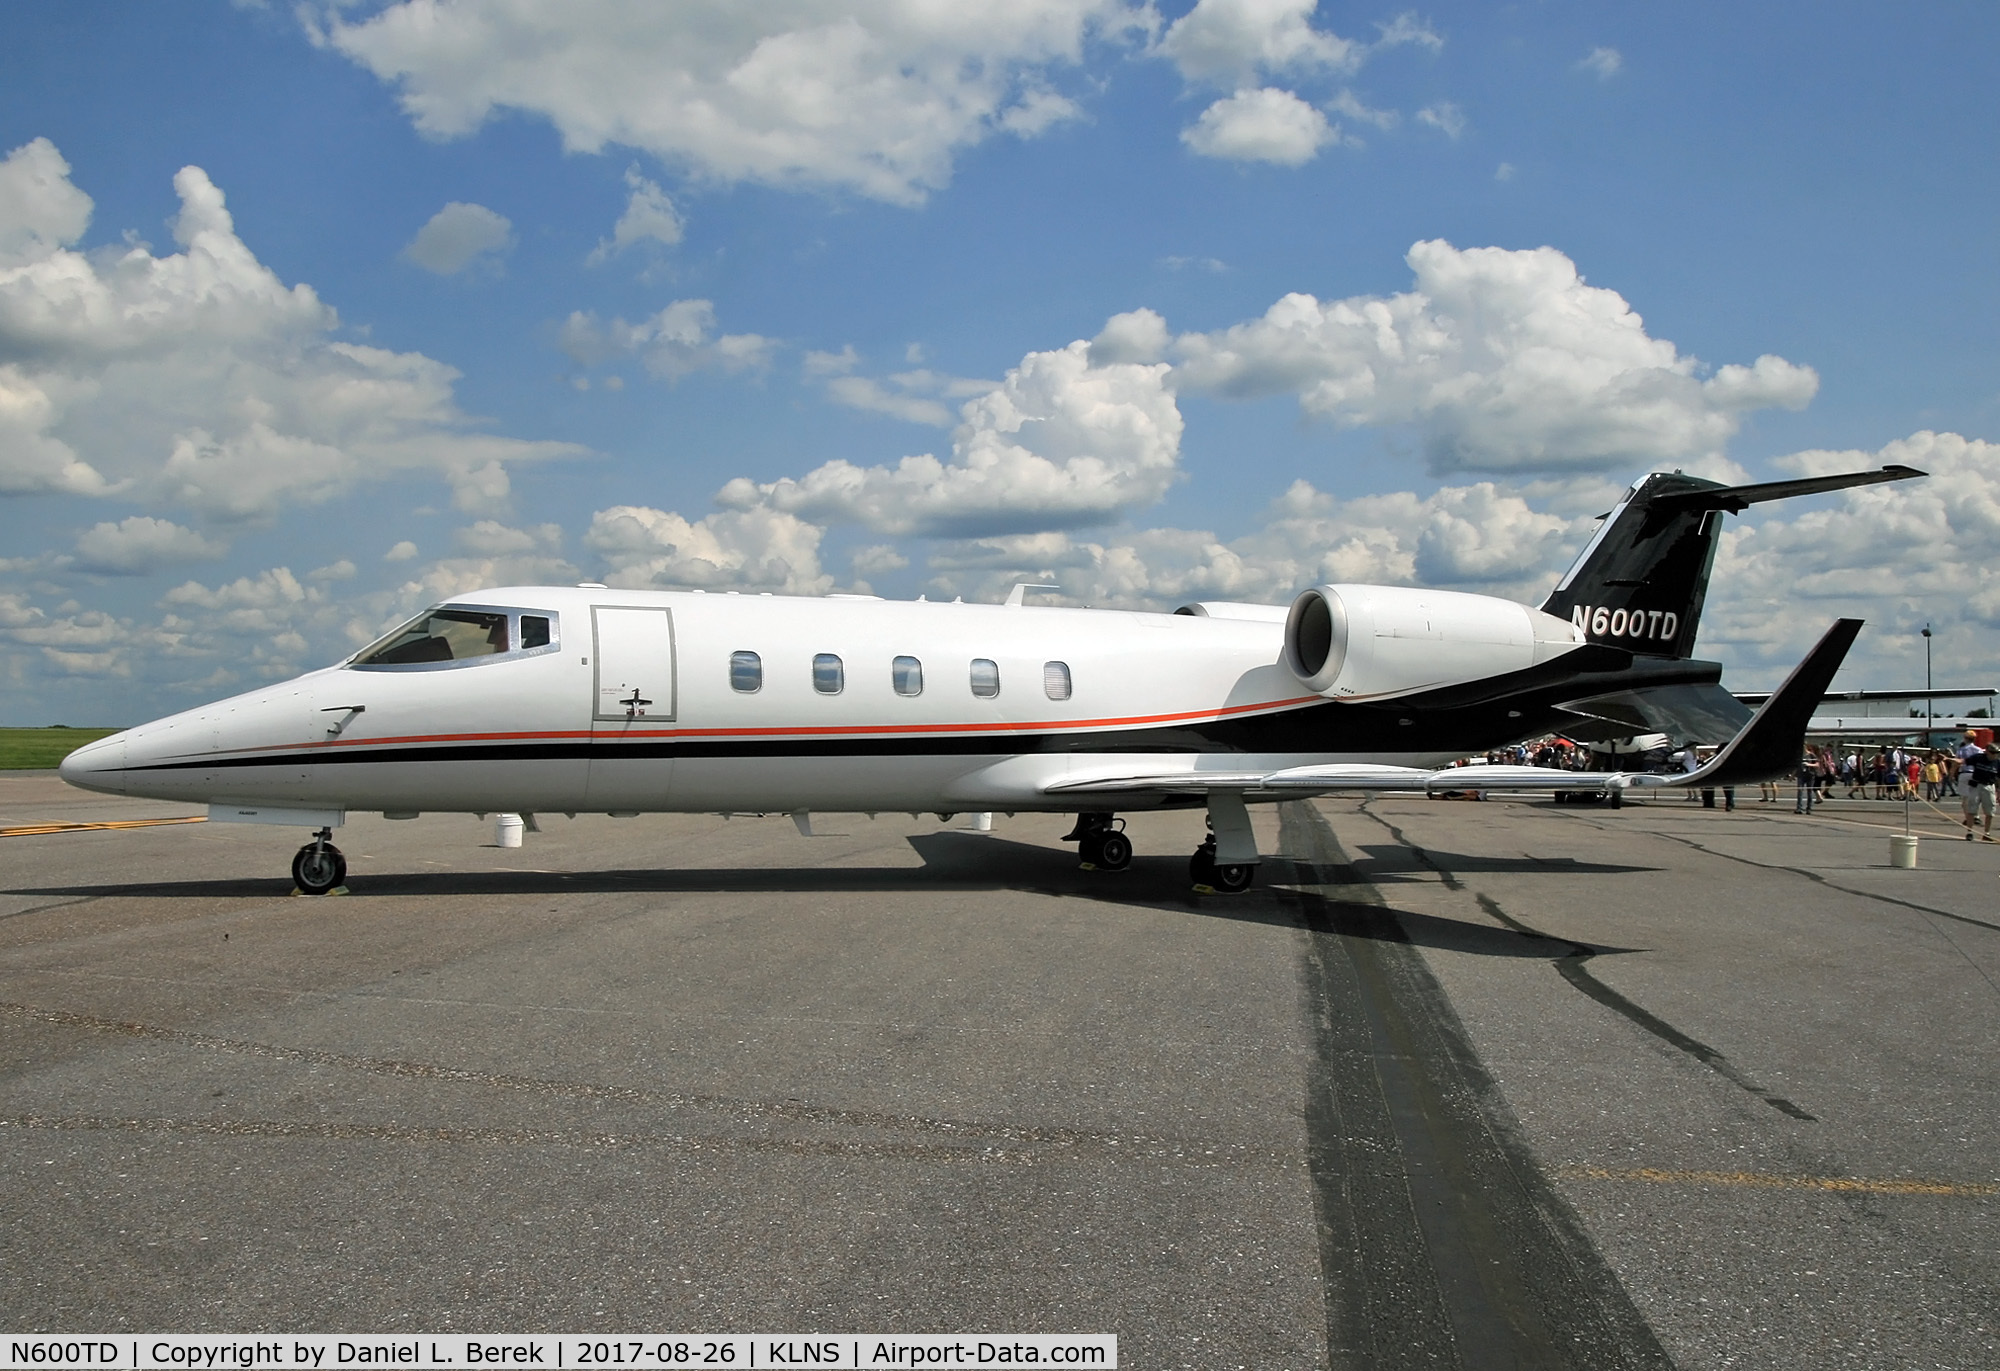 N600TD, 1996 Learjet 60 C/N 60-084, If you have a nice-looking aircraft based at an airport that is hosting an airshow, why not show it off?